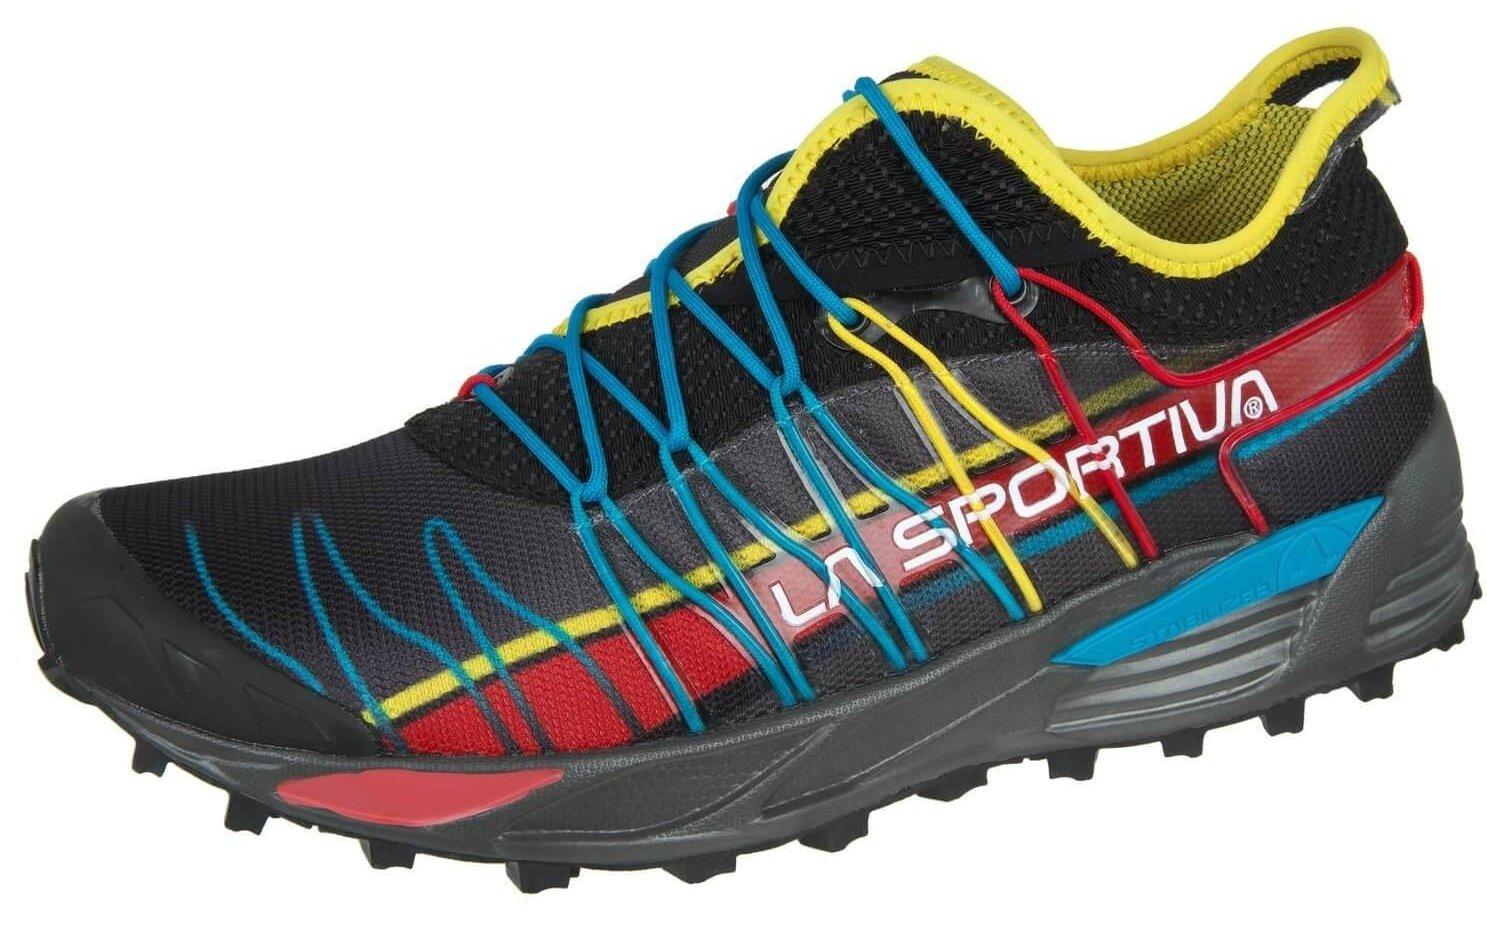 the La Sportiva Mutant offers trail runners a high-performance trail running shoe that has a lot of style